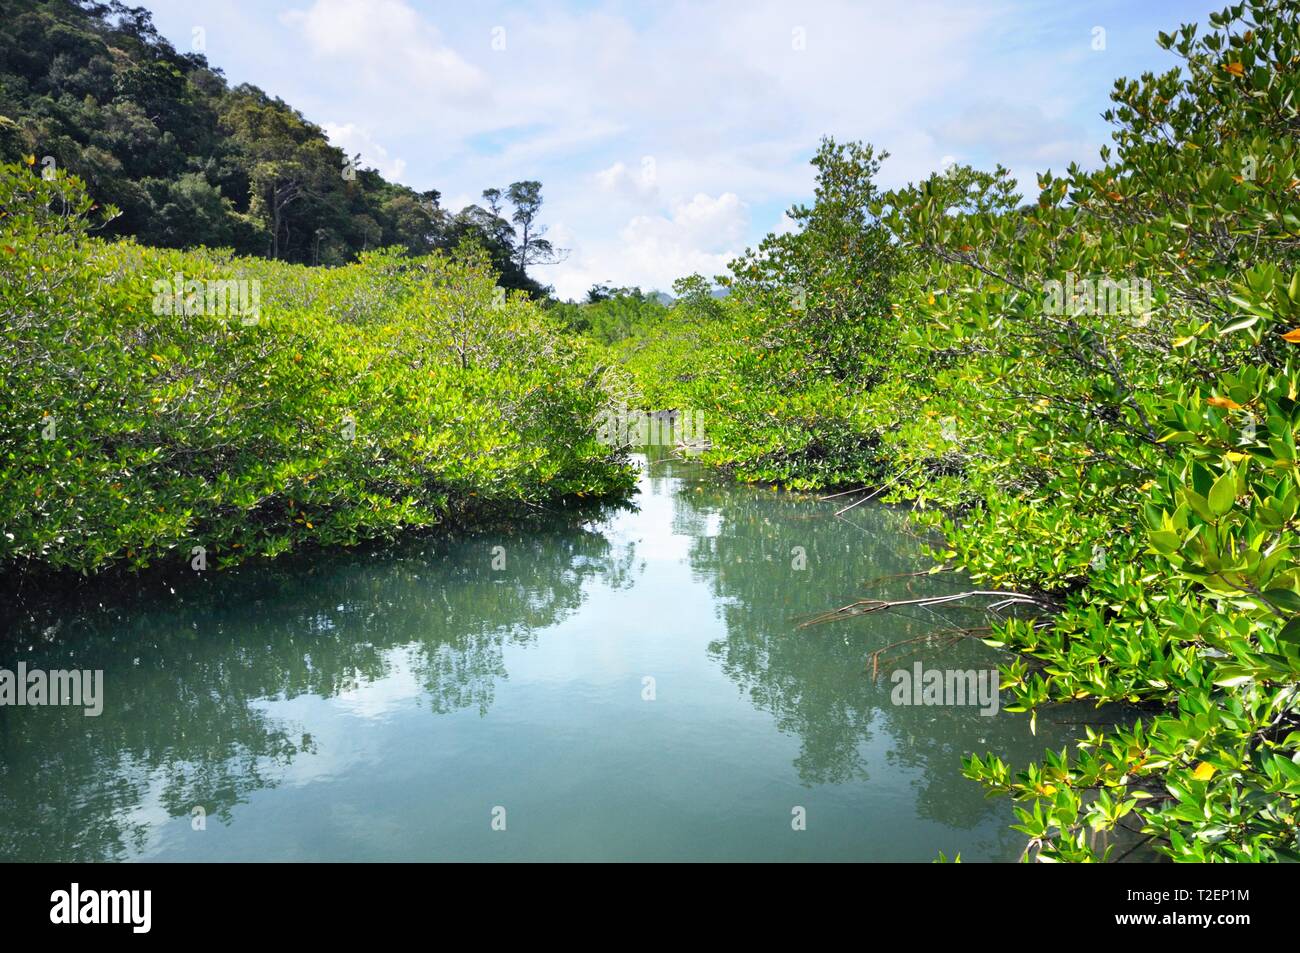 Mangrove forest at the Koh Chang island, Thailand. Stock Photo